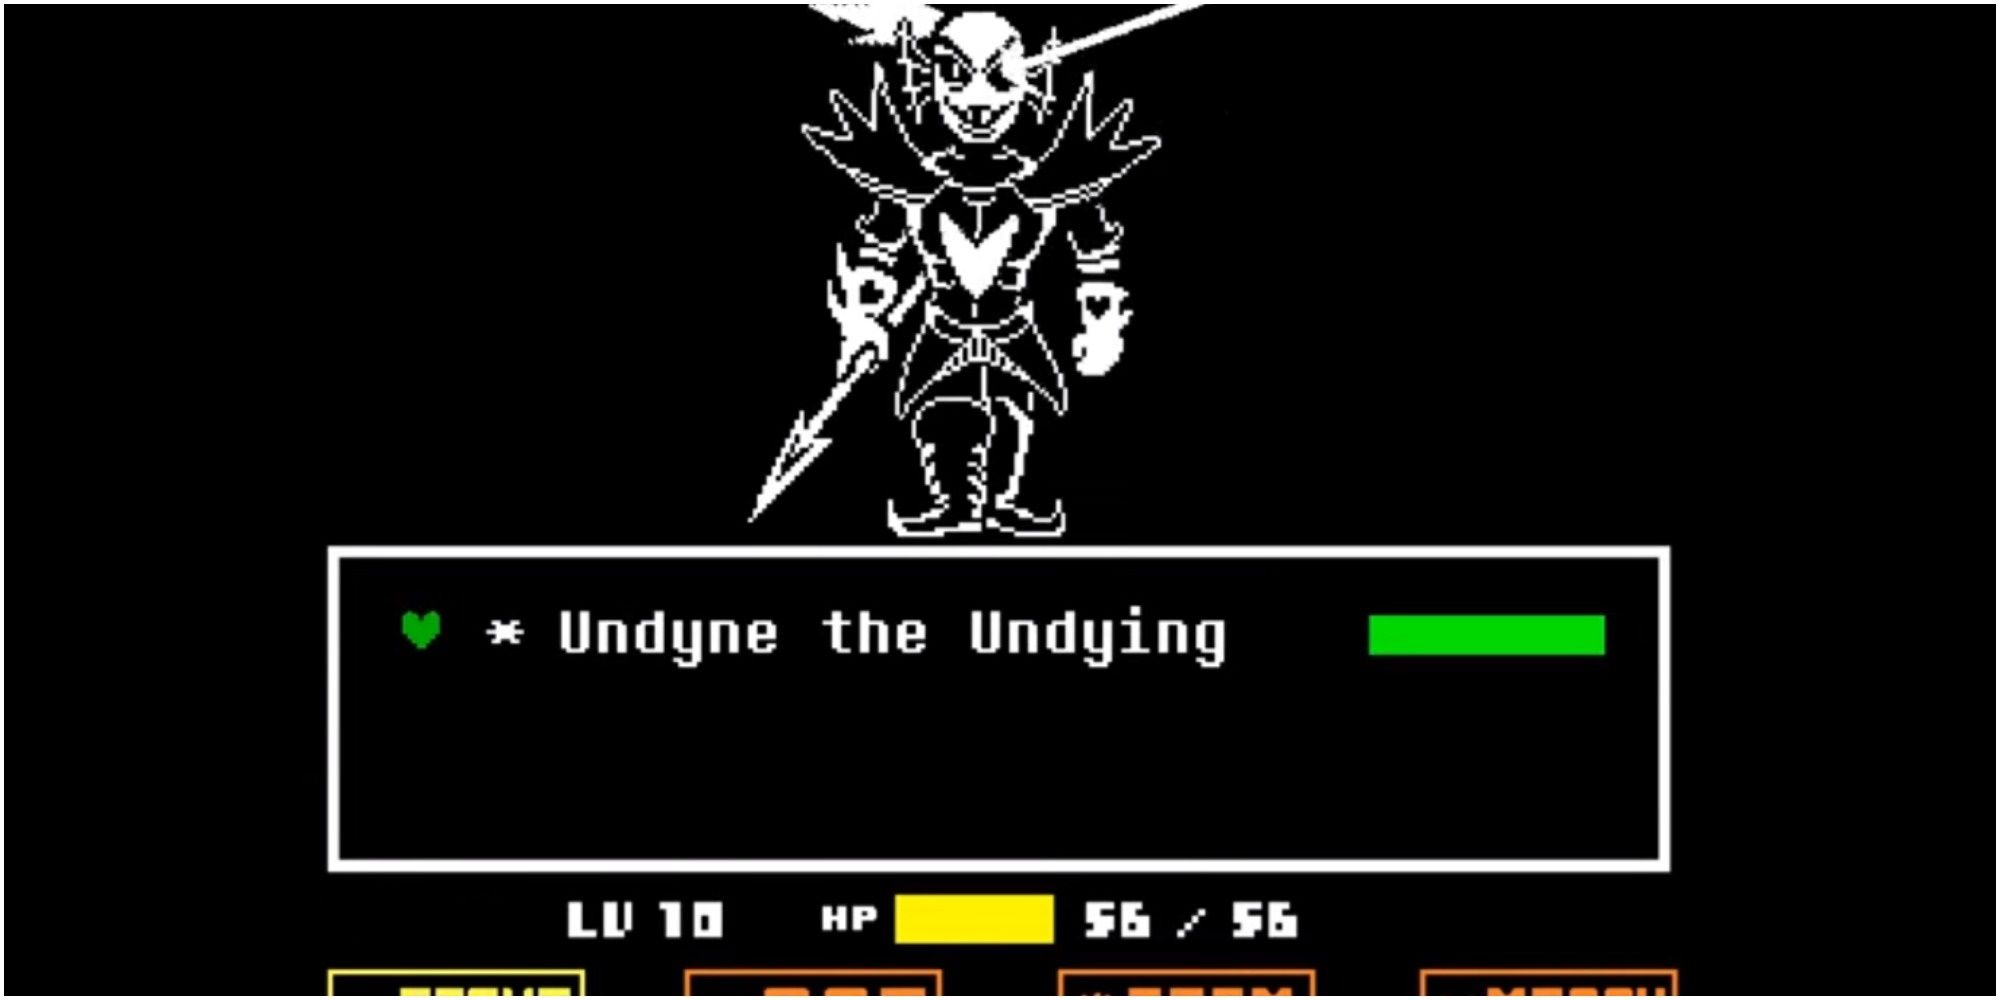 The main character facing Undyne the Undying in the Genocide Run